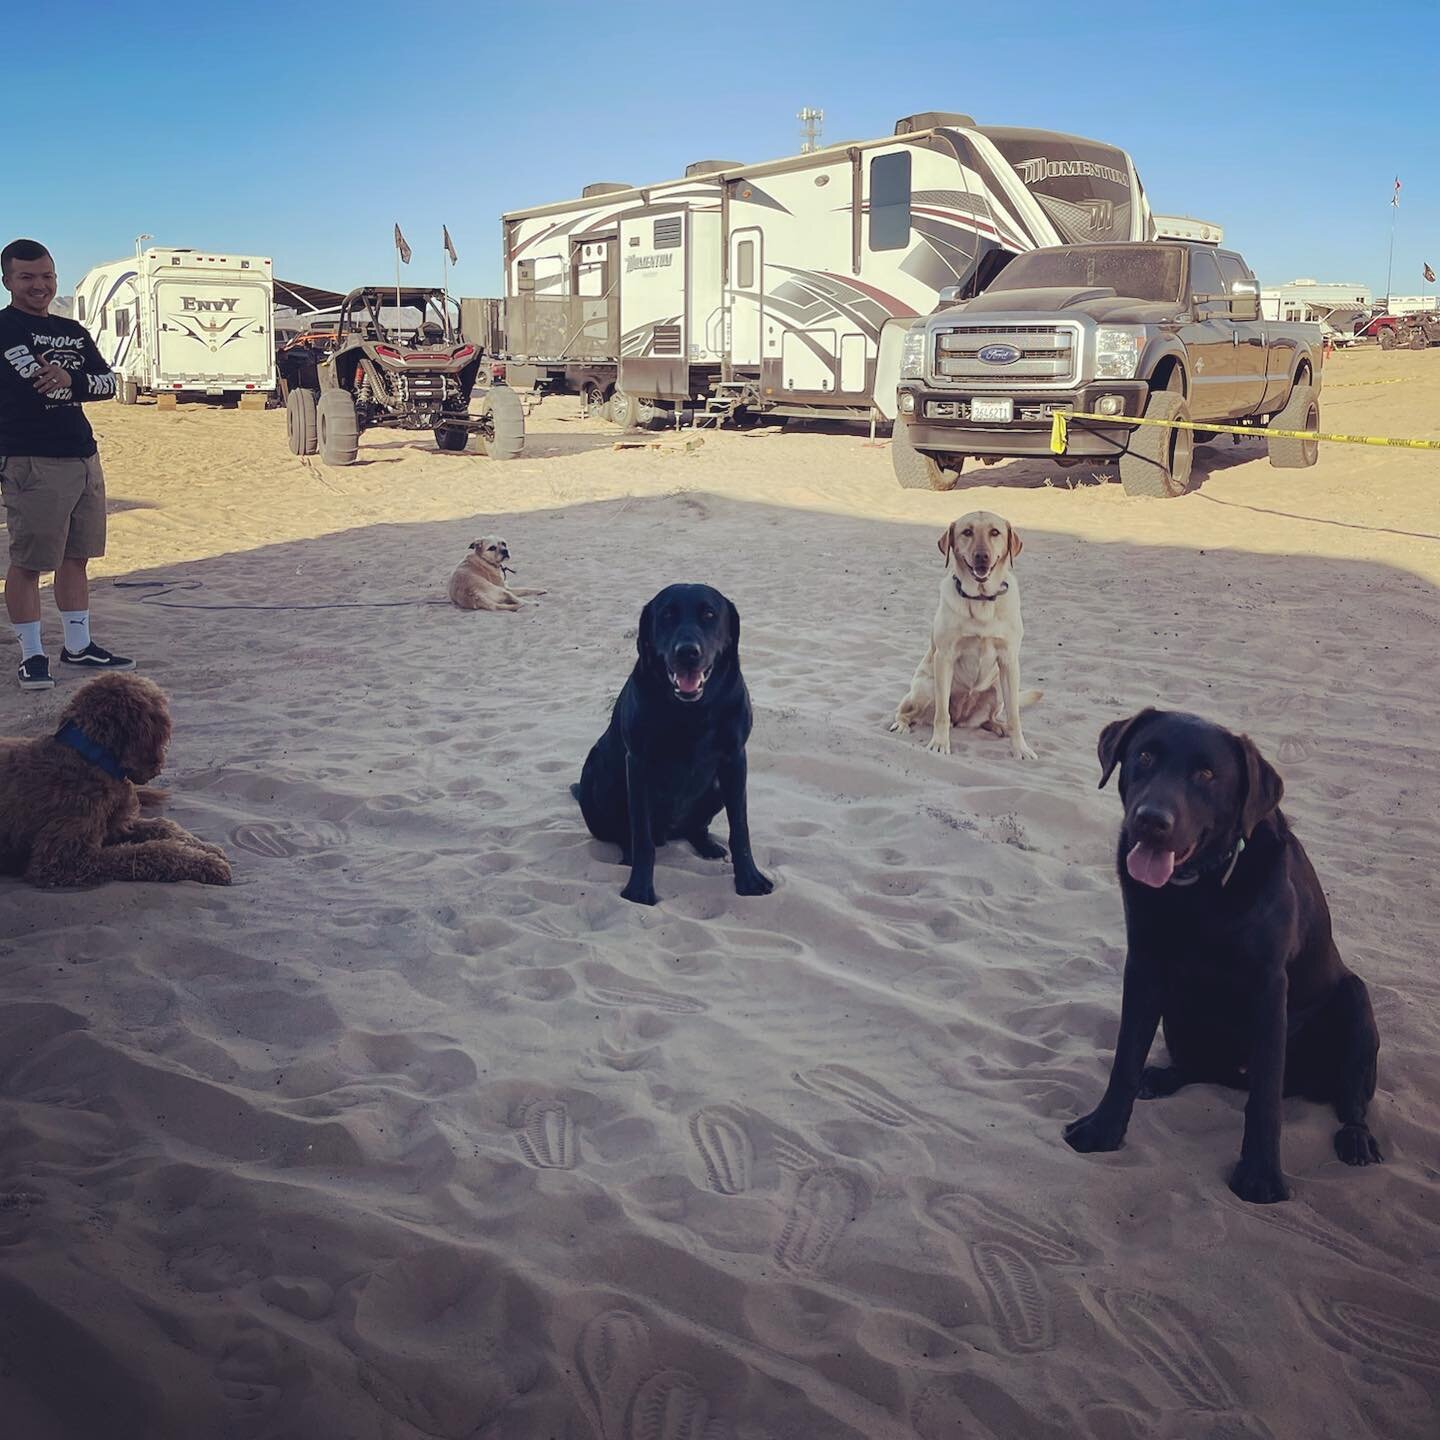 Happy Halloween 🎃 

Here at Paws Up Vacay we treat your dogs as our own. 

This weekend Lily and Oscar joined us for a camping trip. These two board with us every year for a few months at a time 😊